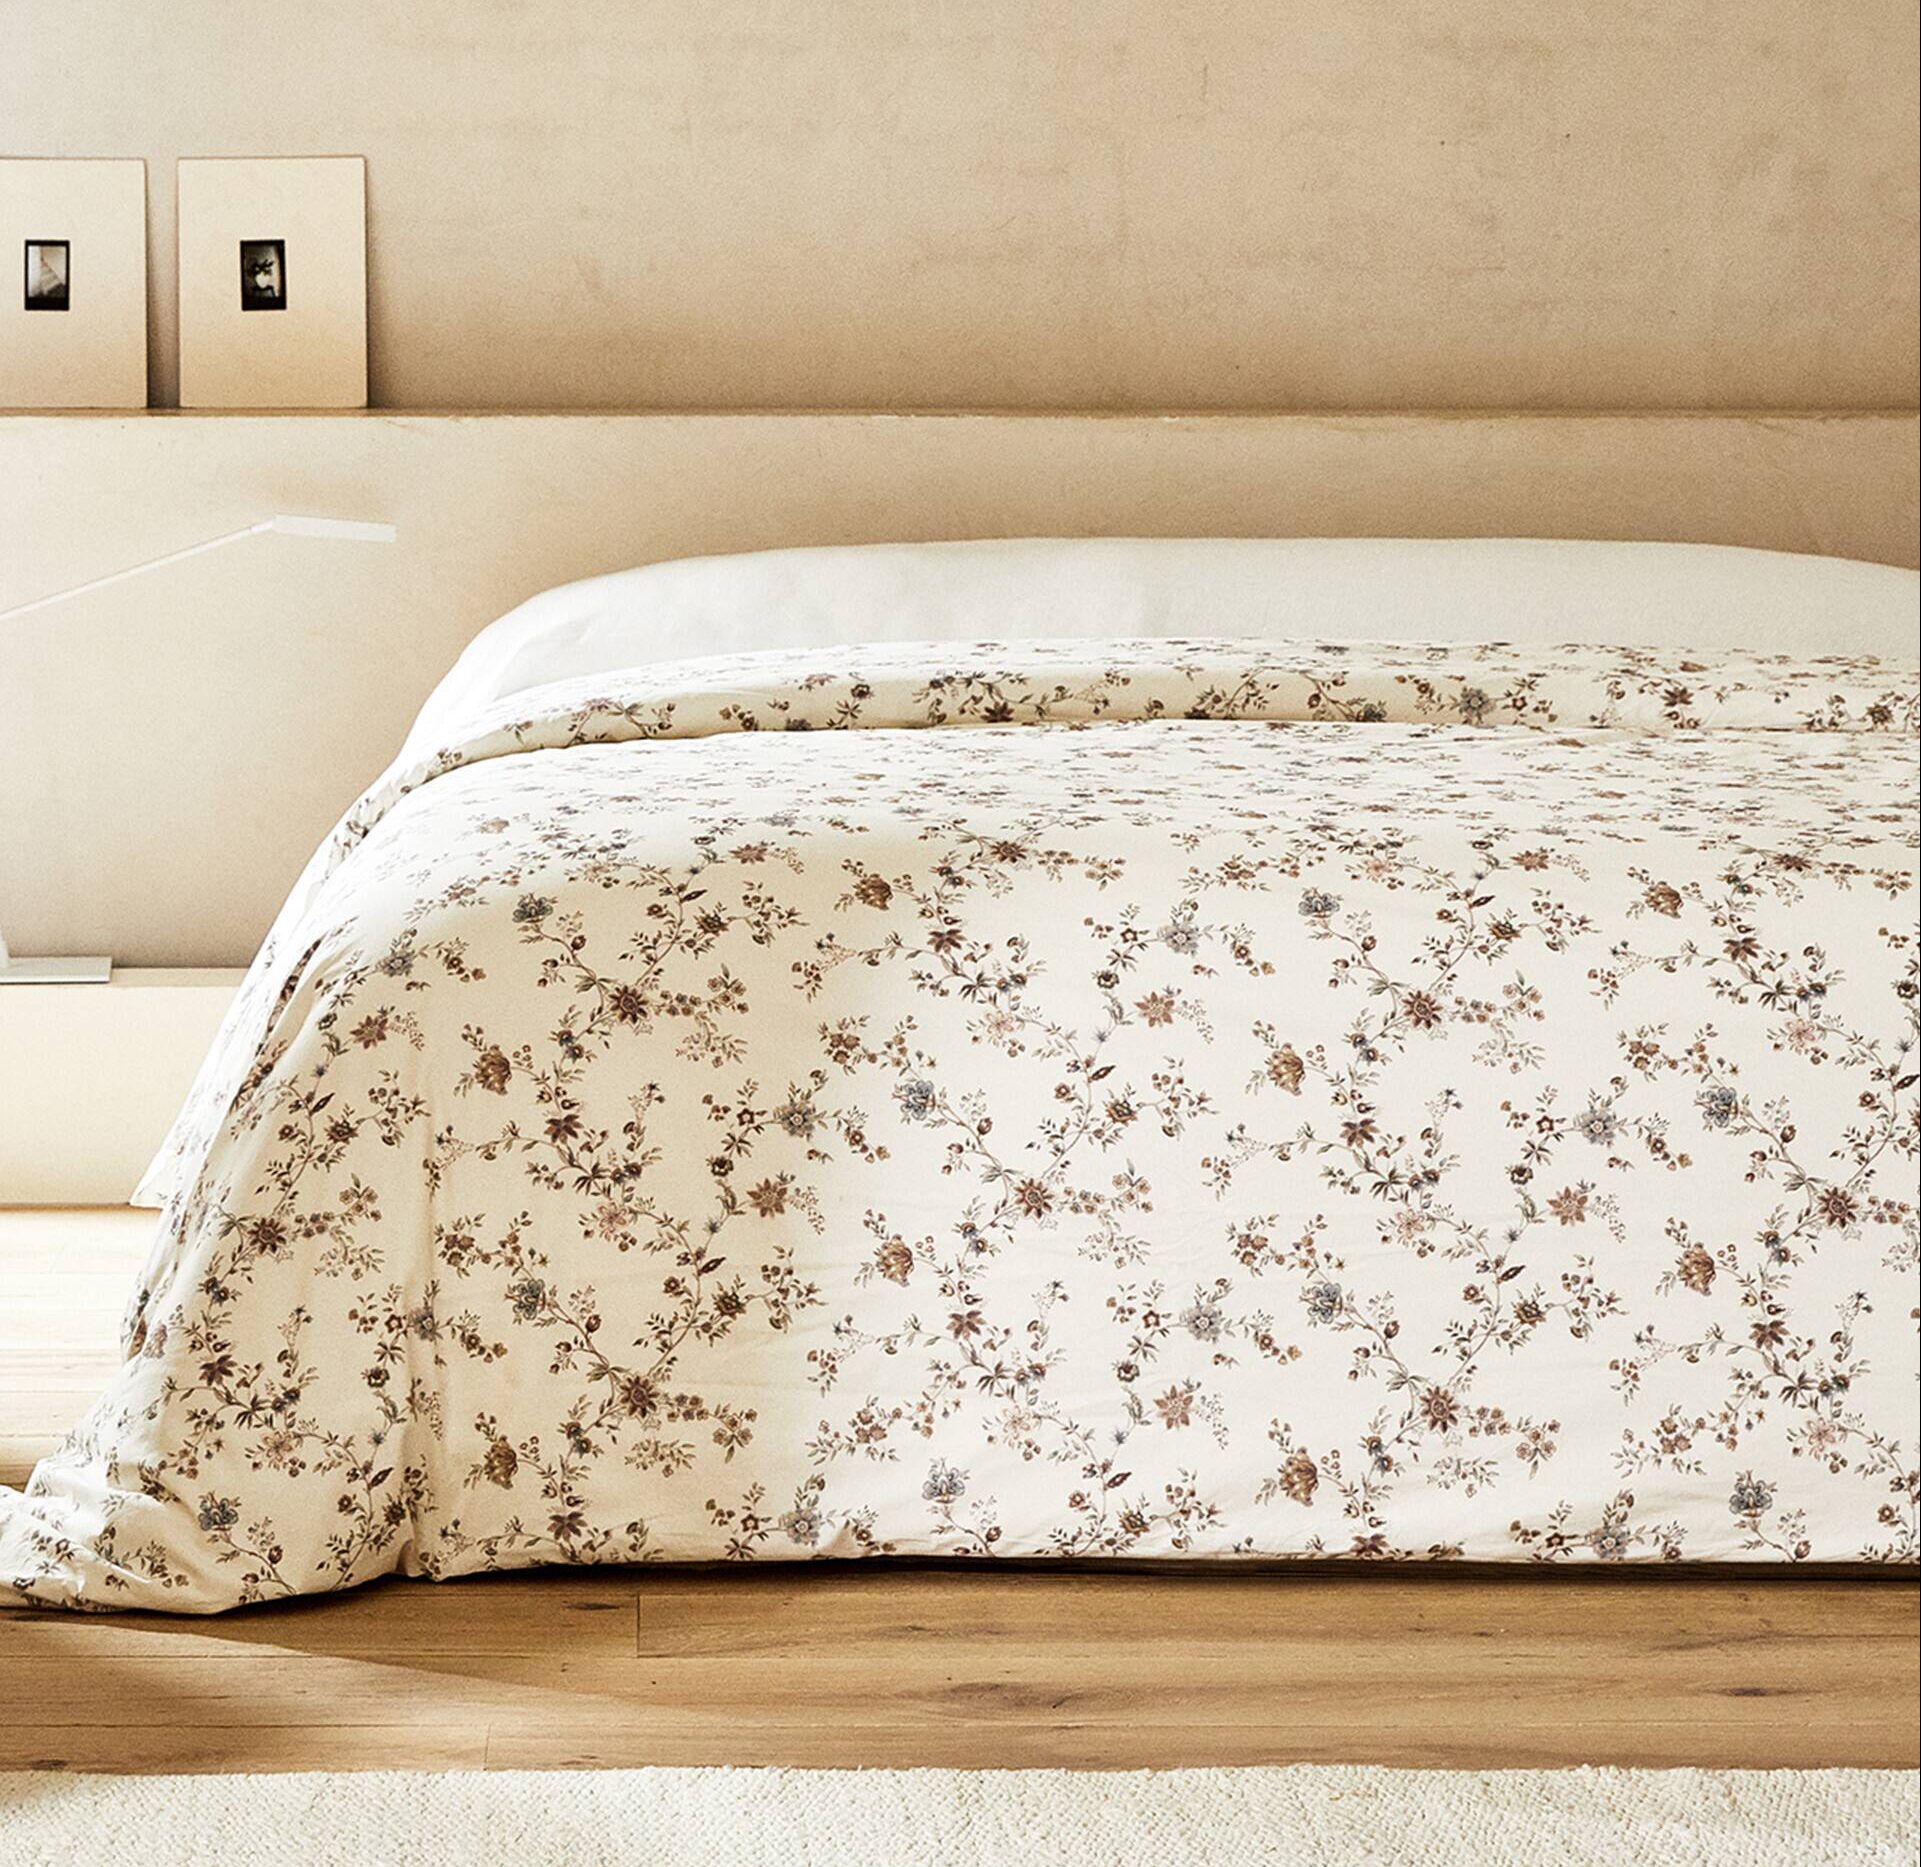 Multicolored floral print duvet cover by Zara Home